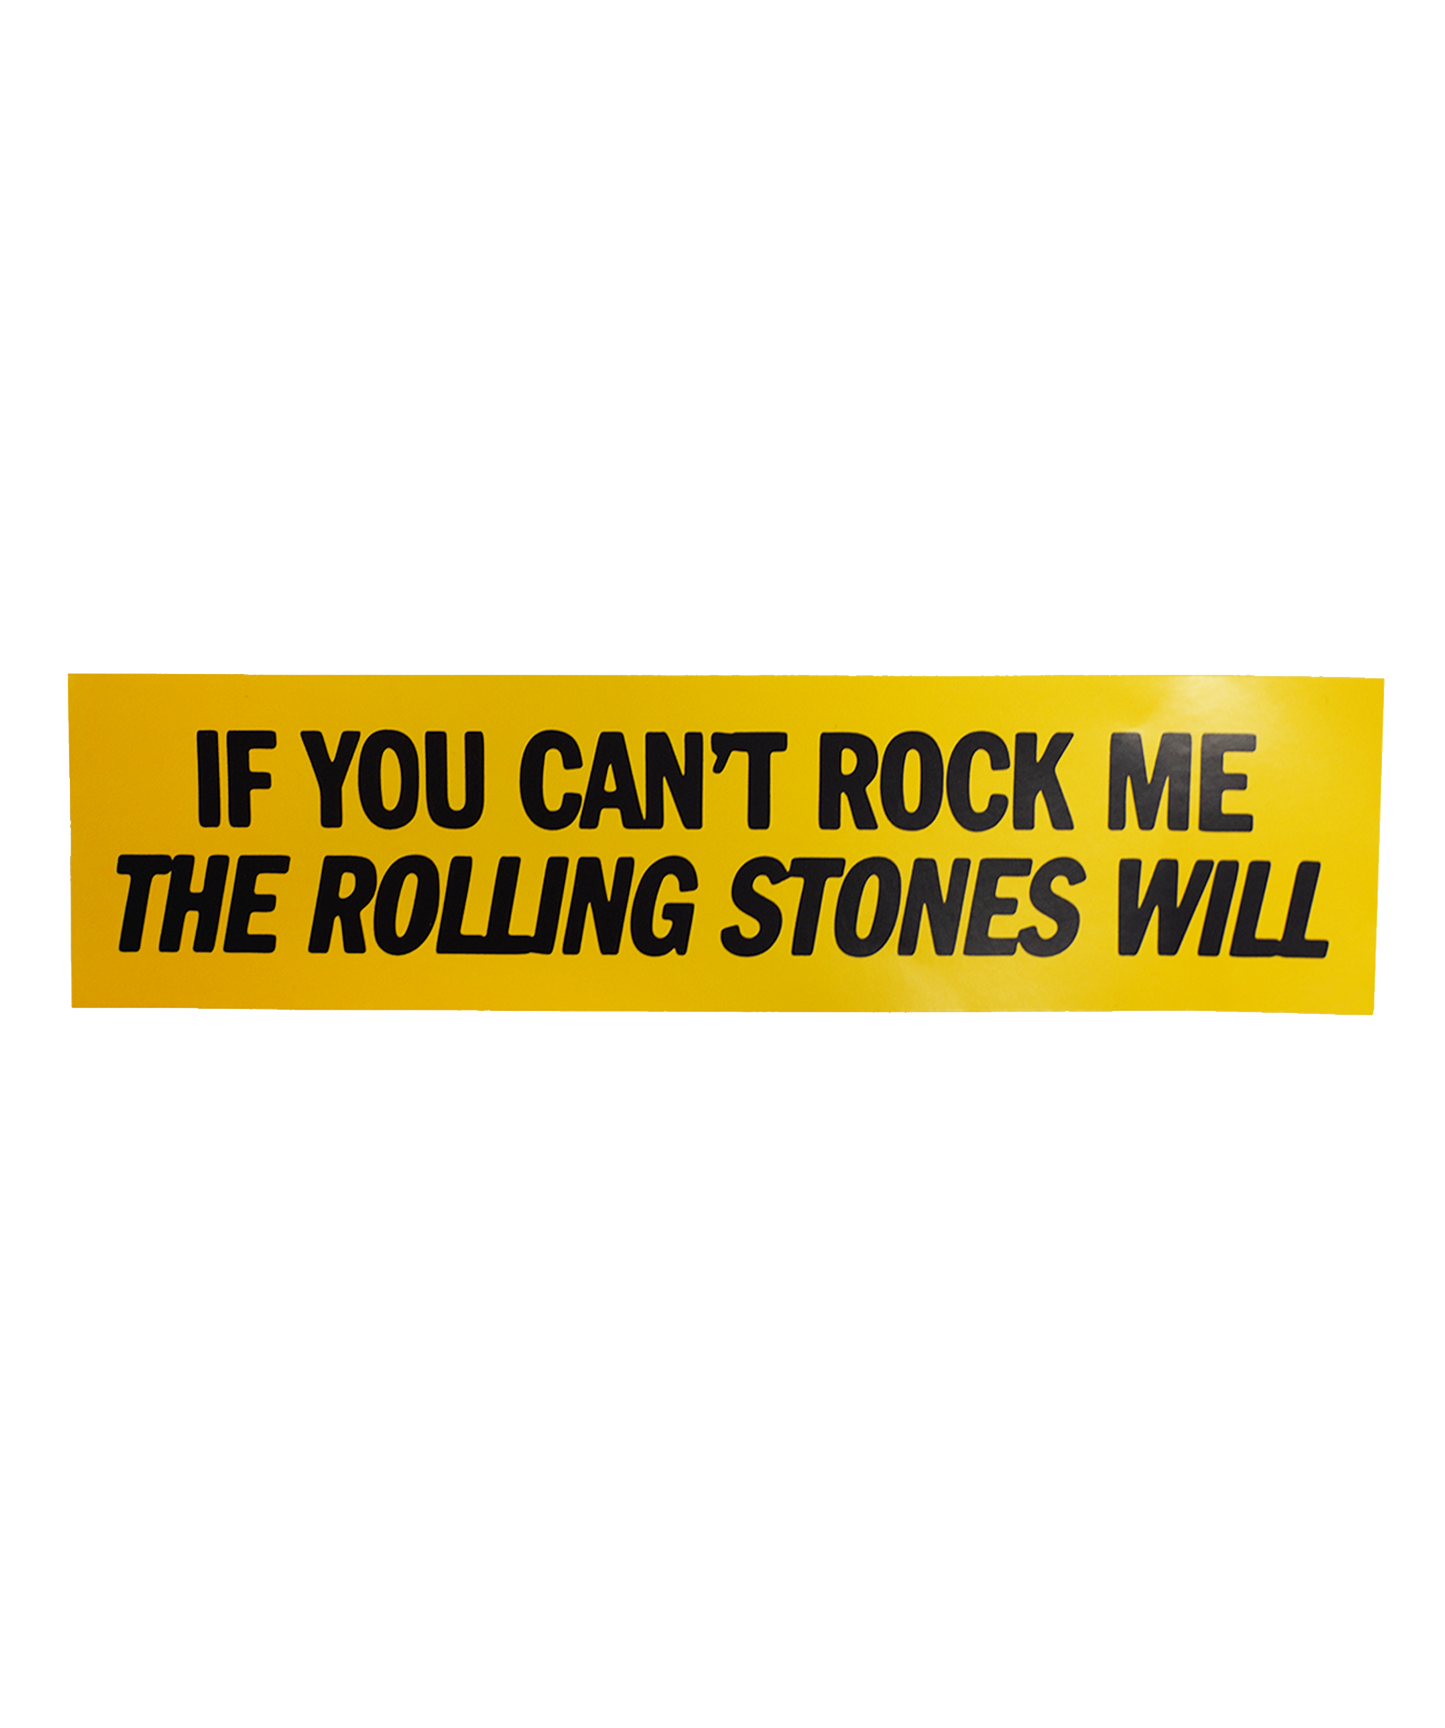 The Rolling Stones Bumper Sticker • The Rolling Stones x Oxford Pennant